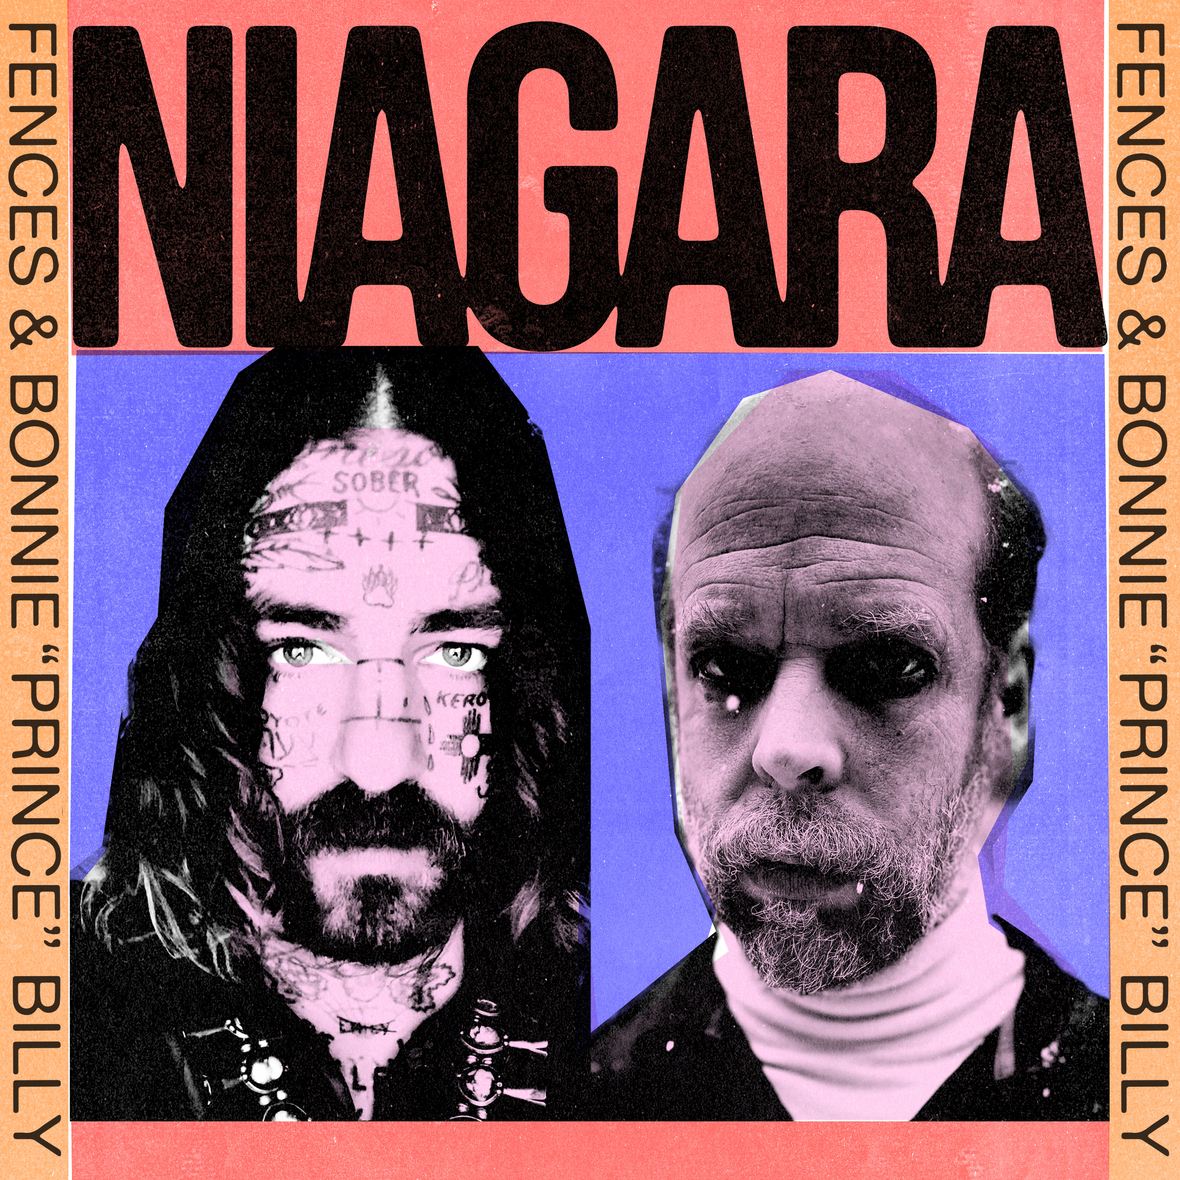 Fences Collabs with Bonnie “Prince” Billy on New 2-Track Single “Niagra”- Featuring an original and a cover of the Rolling Stones’ “Sympathy For The Devil”